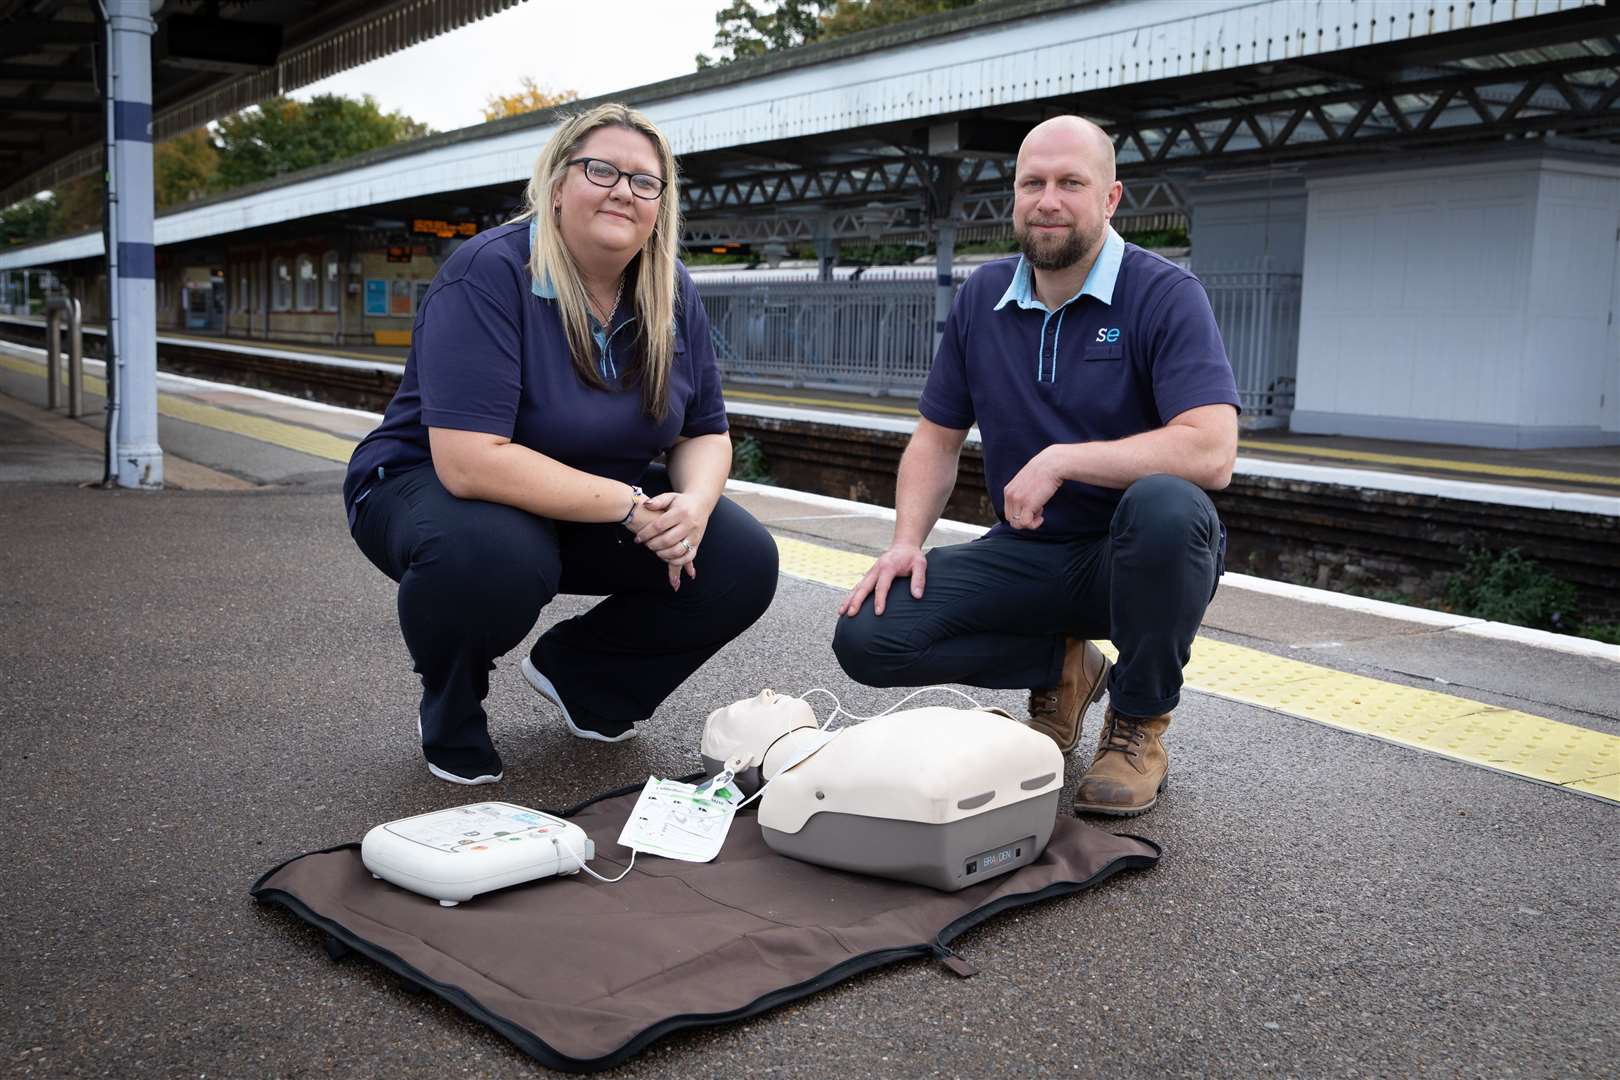 Laura McMahon and Sebastian Szymanski used a defibrillator to save the life of a member of the public at Maidstone East station. Picture: Southeastern